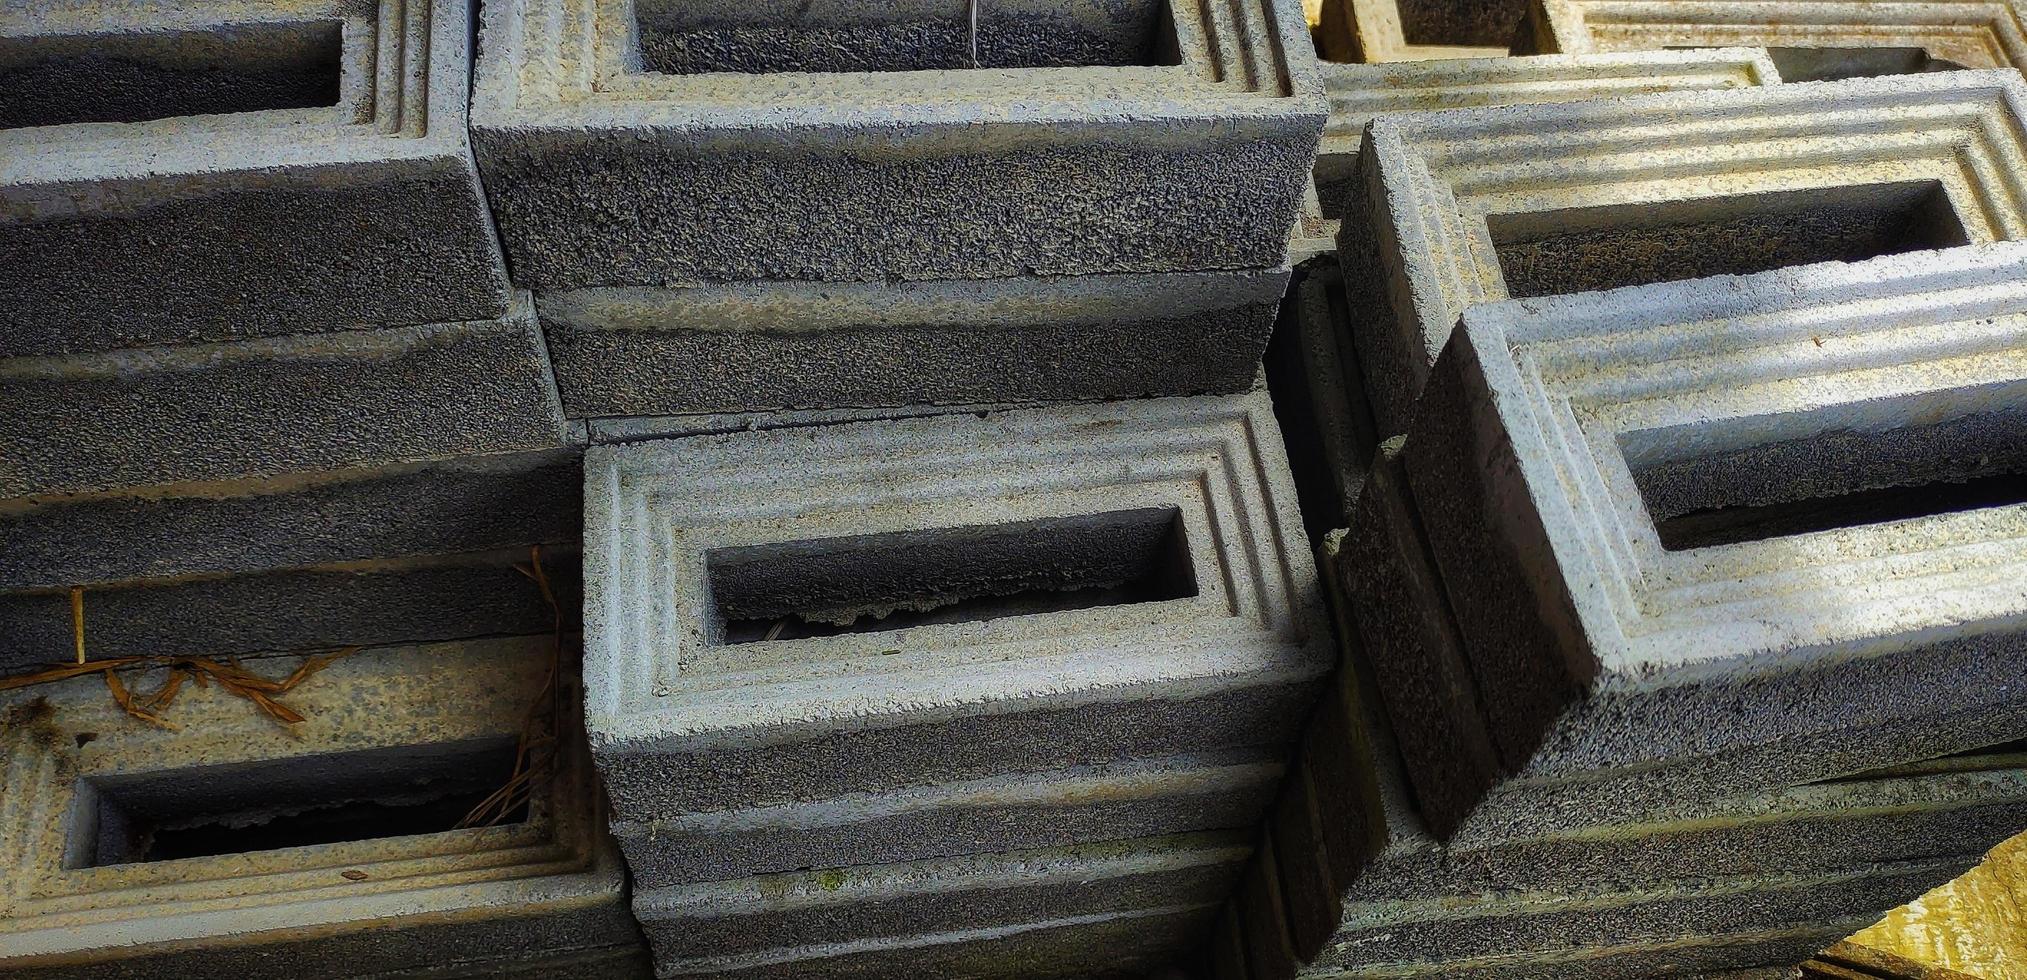 Pile of loster bricks in a brick making factory. photo